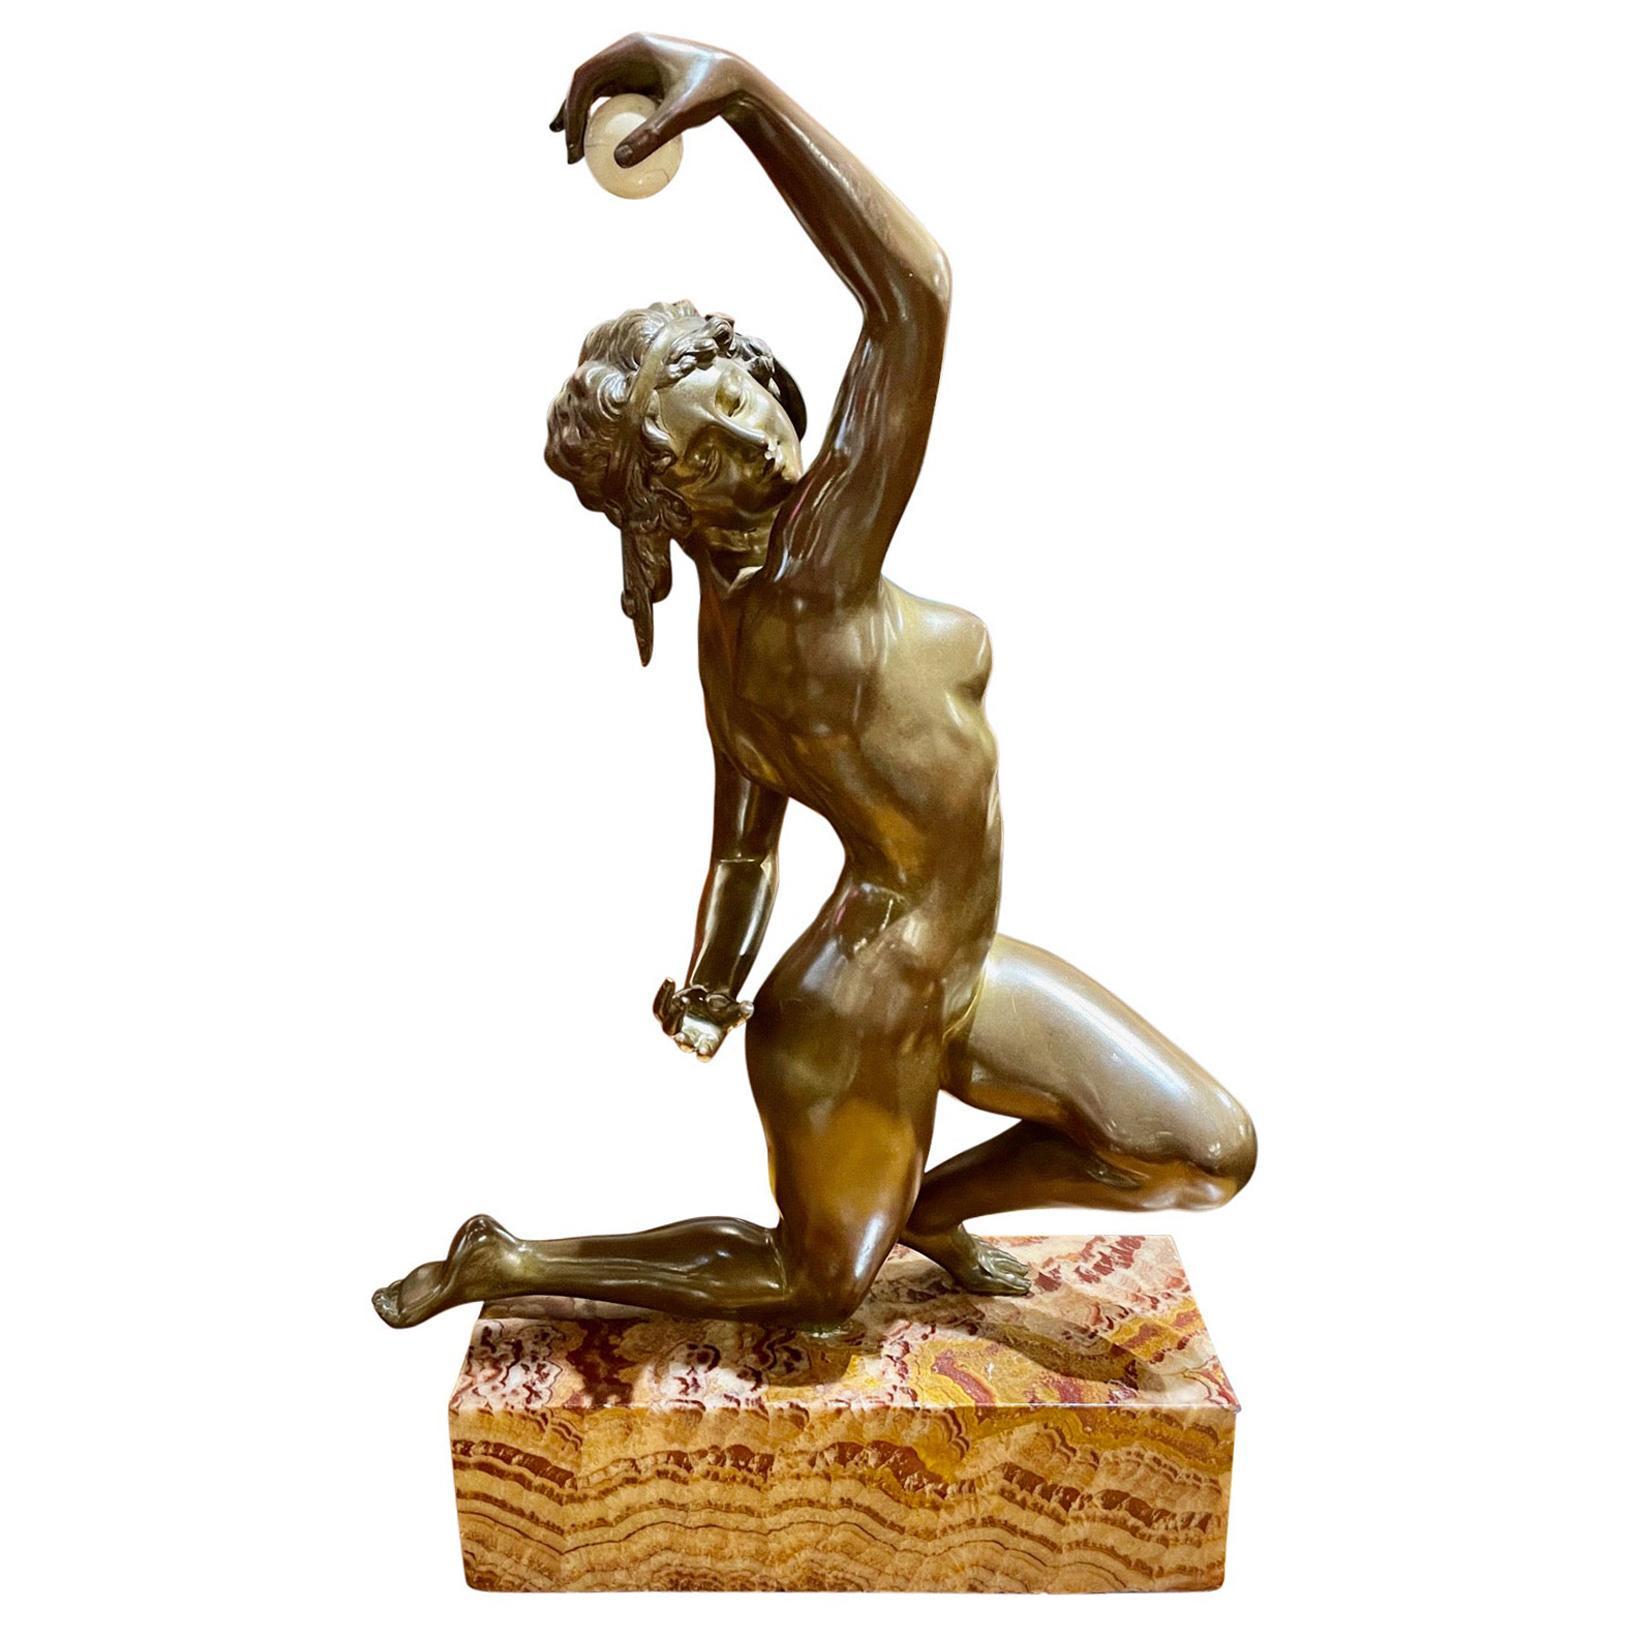 An early Art Deco bronze nude sculpture of a Dancer by Affortunato Gory. This is one of the most spectacular pieces we have offered. The darkly gilded patina is smooth and flawless, highlighting all the subject's delicate features. Note her lovely